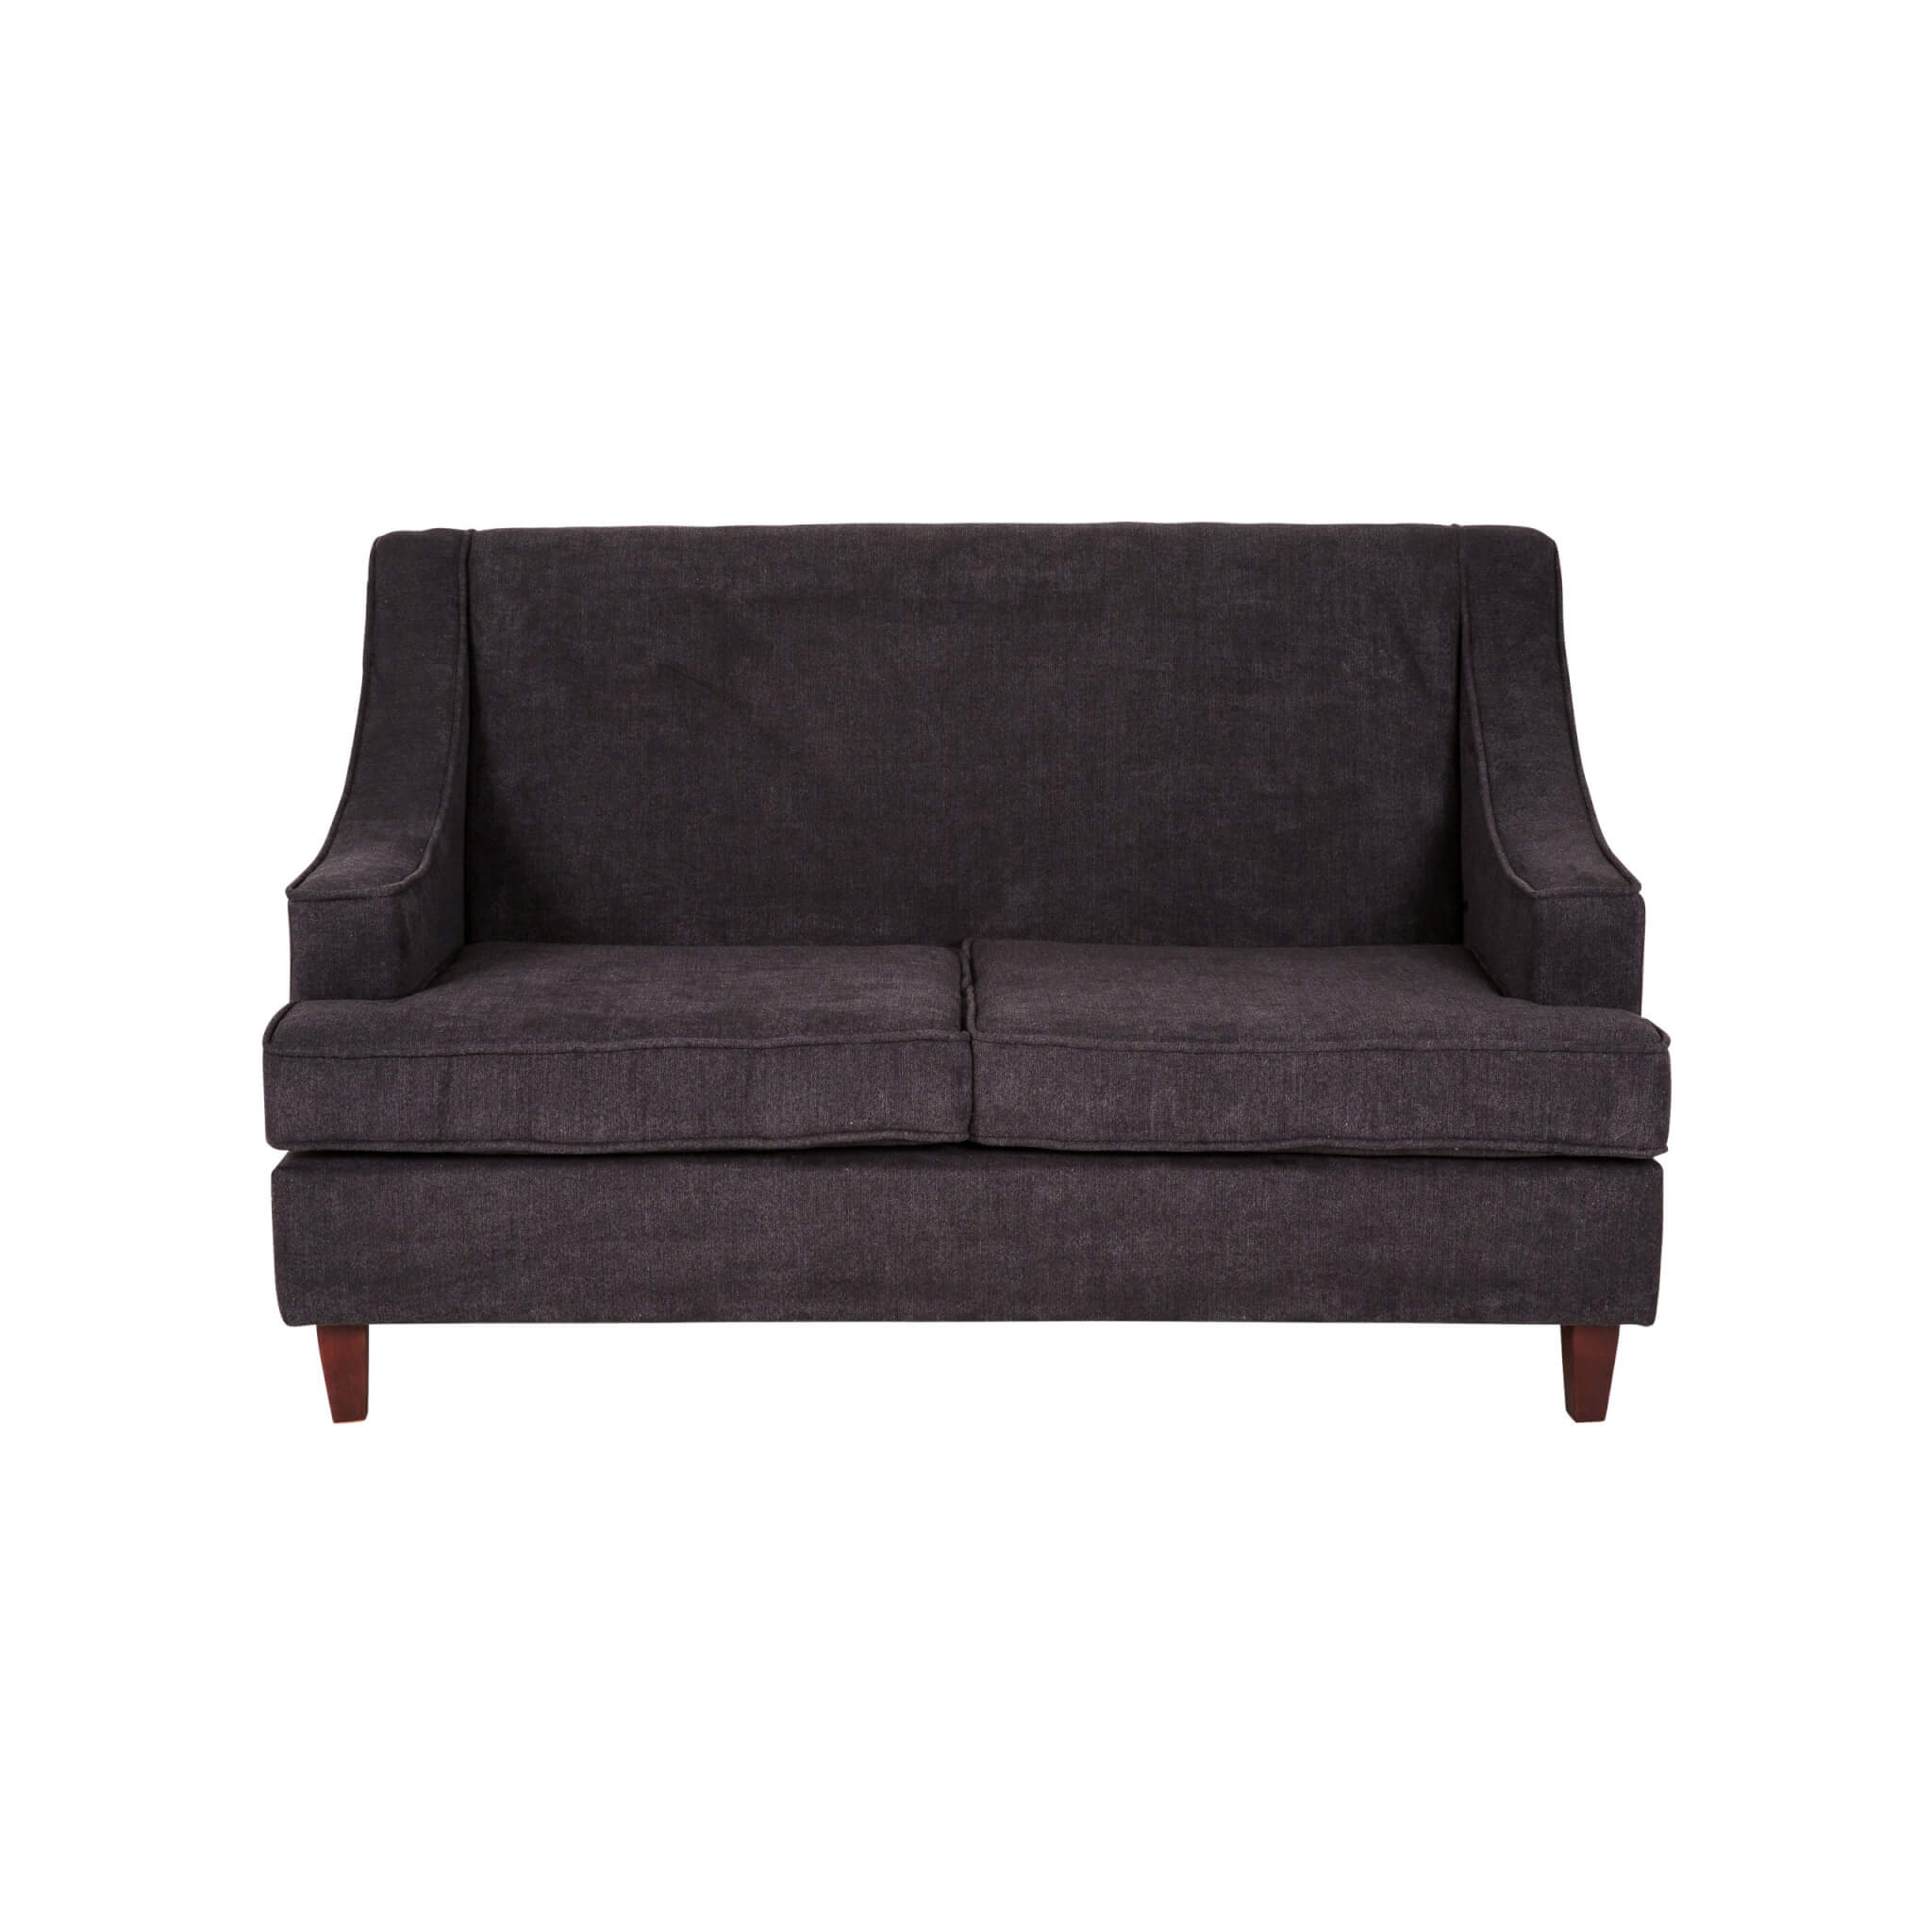 Hudson Two Seater Lounge – Charcoal – 146cmL x 85cmW x 89cmH